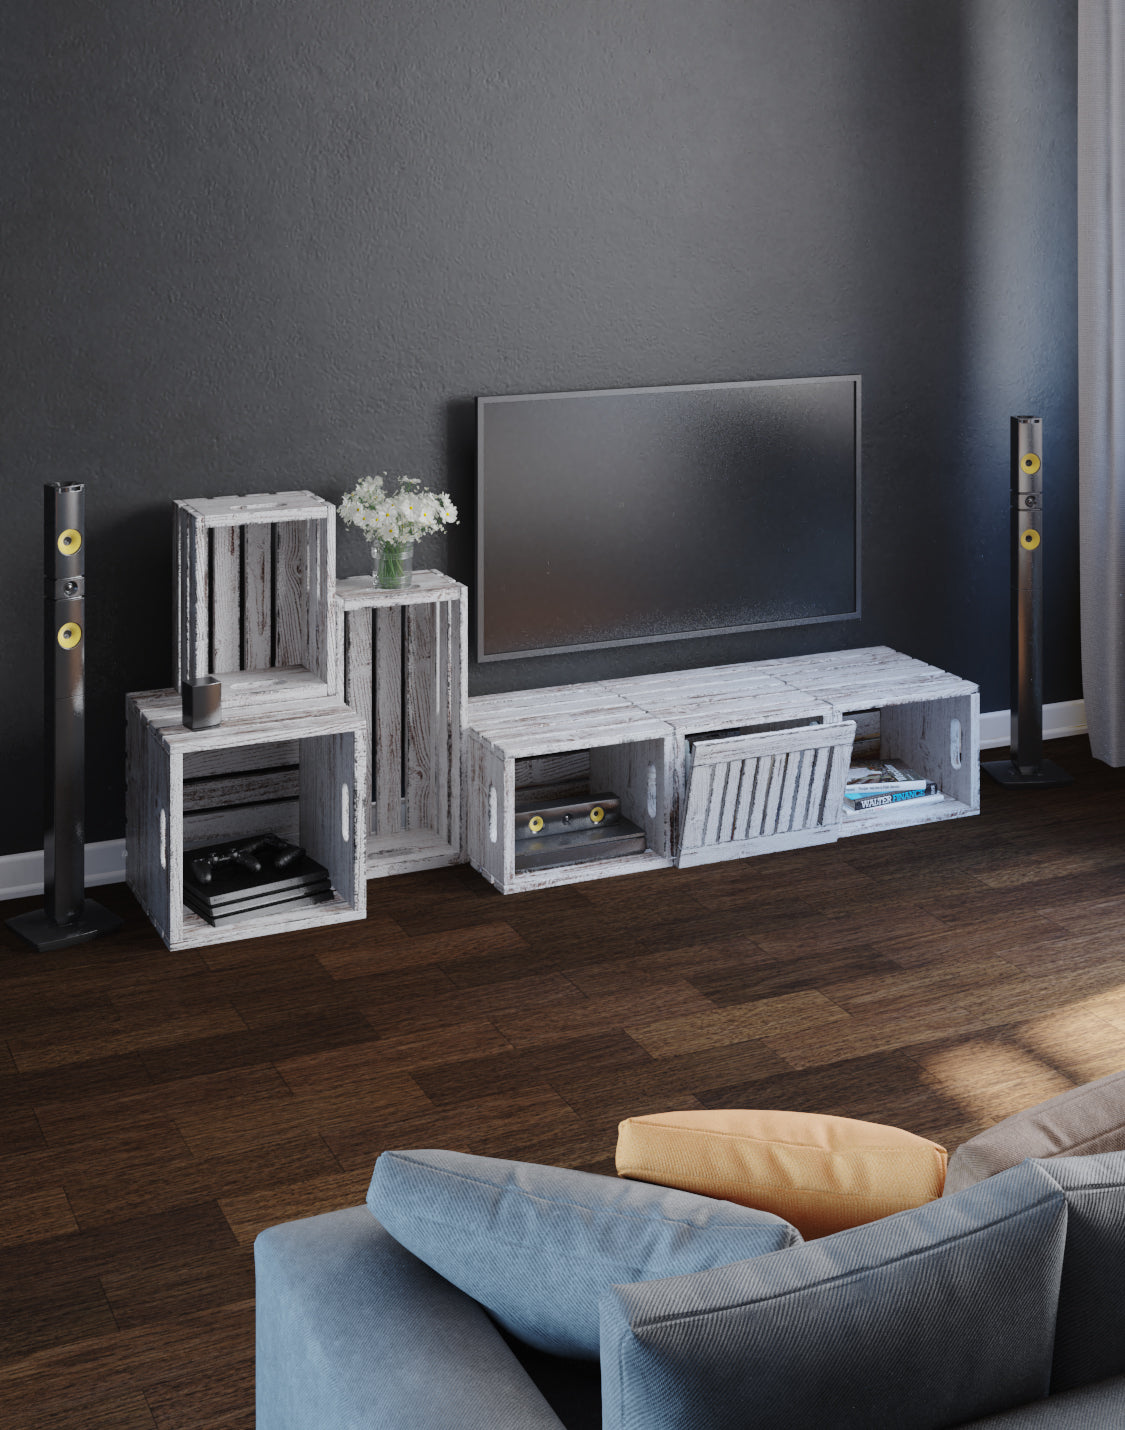 Roger TV Unit Modular And real wood furniture product